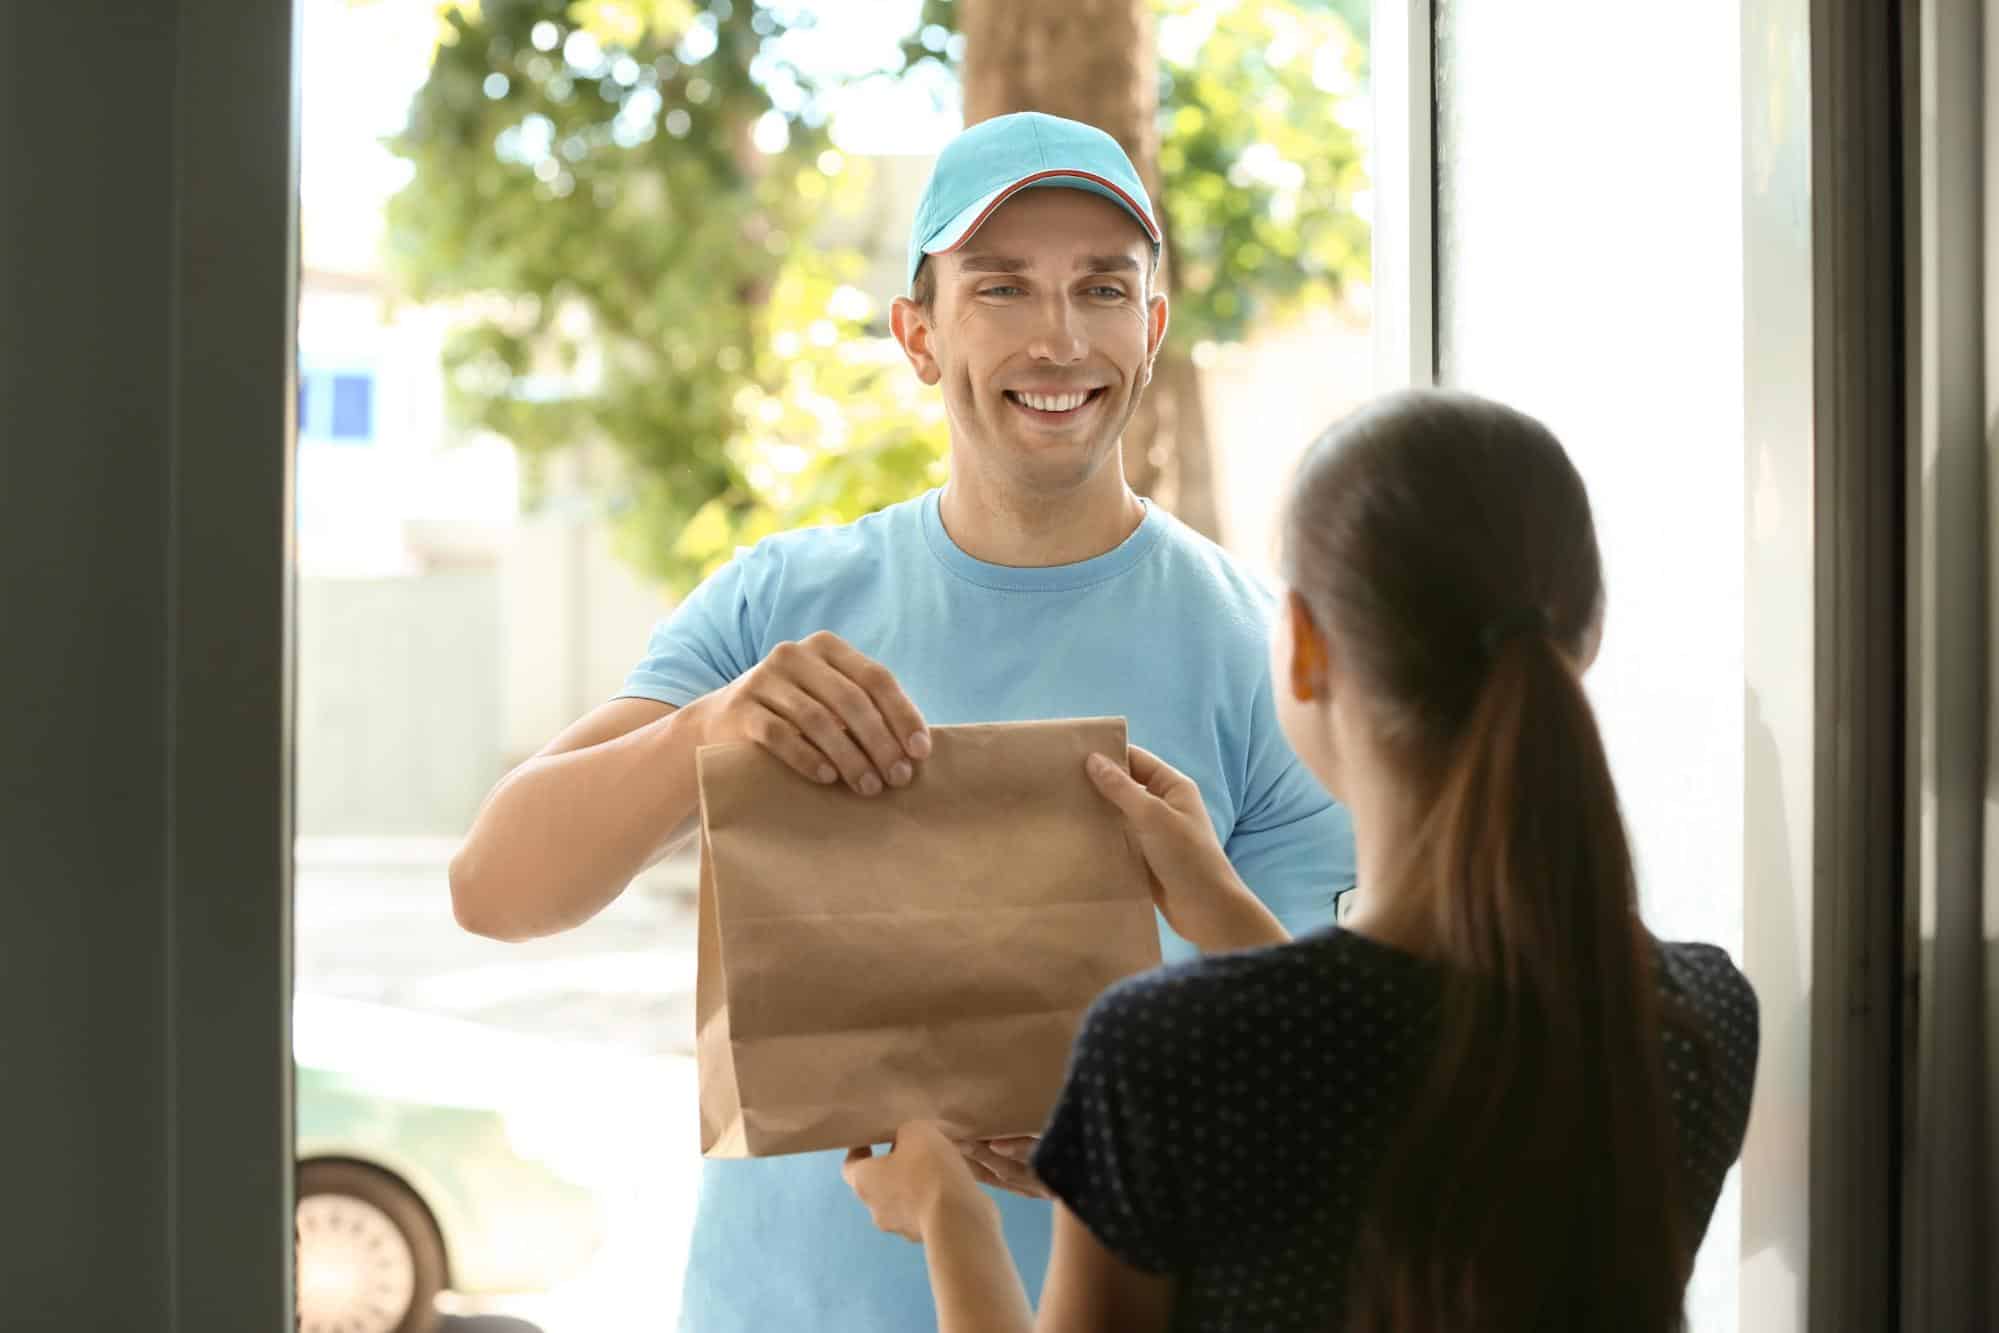 What is Prime Now: Man delivering goods to customer at doorway